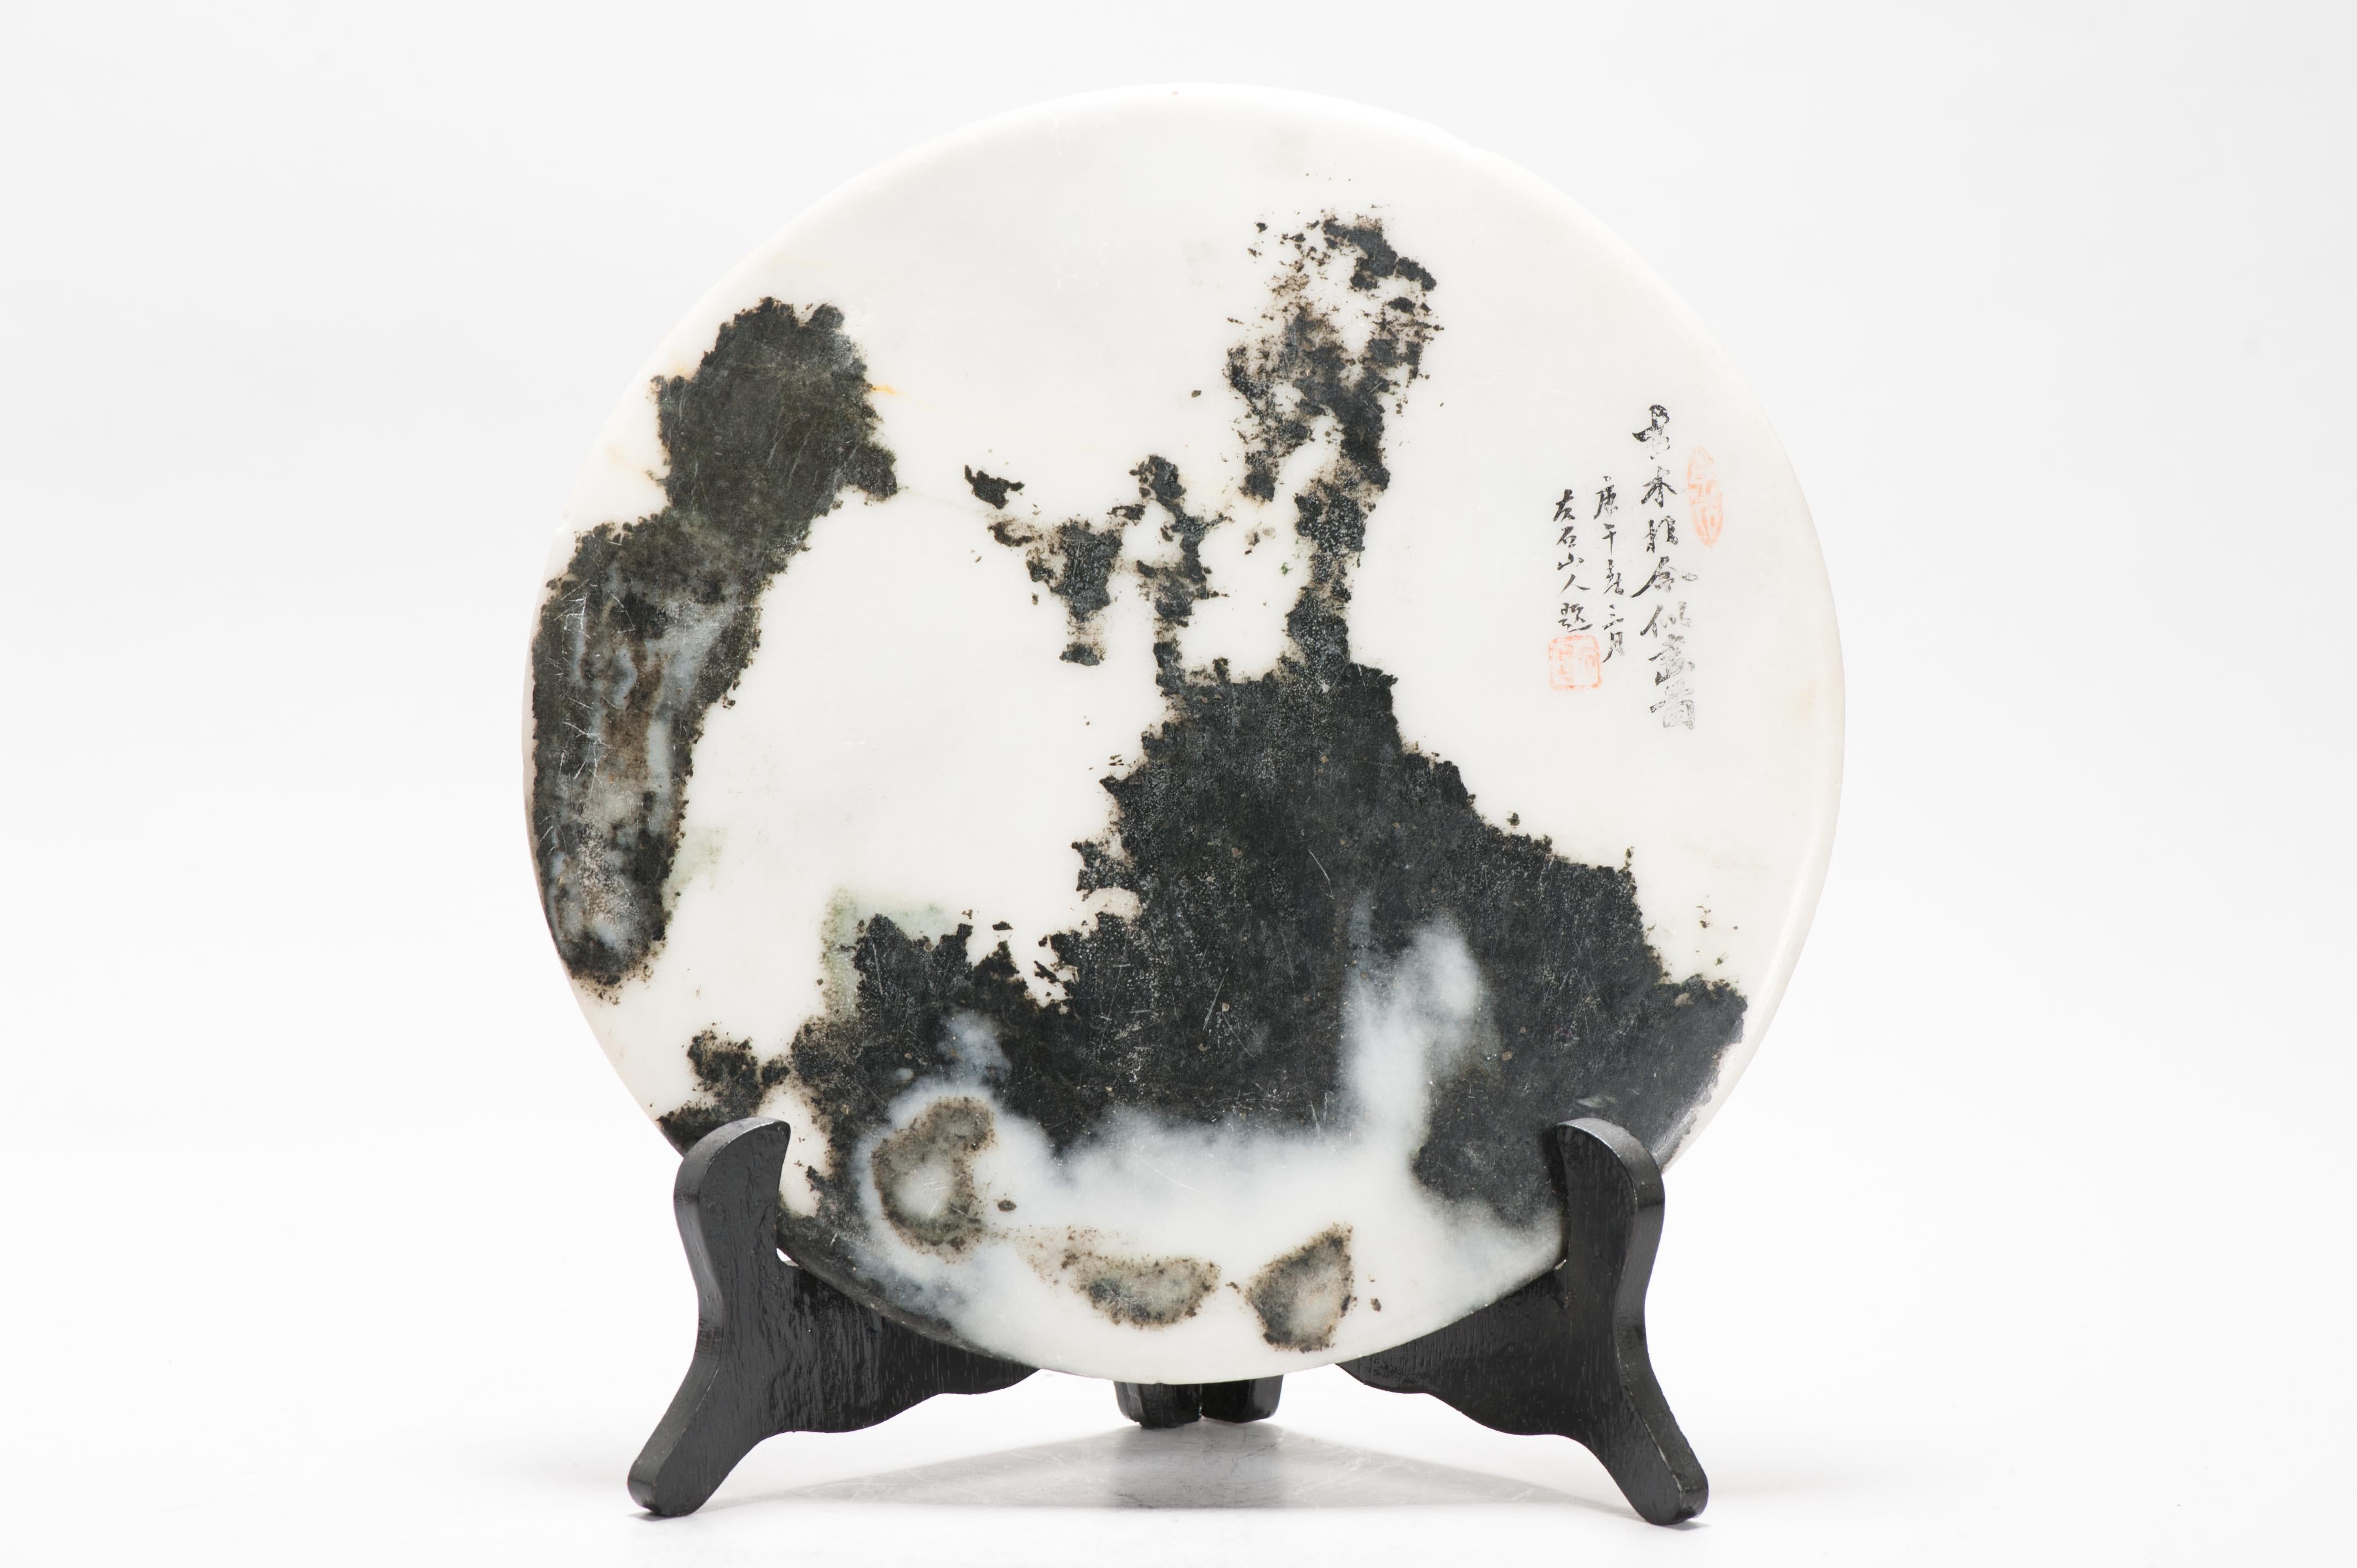 A Chinese Landscape Dream Stone. Inscribed with a poem in the 19th century. The stone reminiscent of the Yuan landscapes in the style of Ni Zan. These rock were treasured by Chinese Literati and Scholars. This art form is centuries of years old